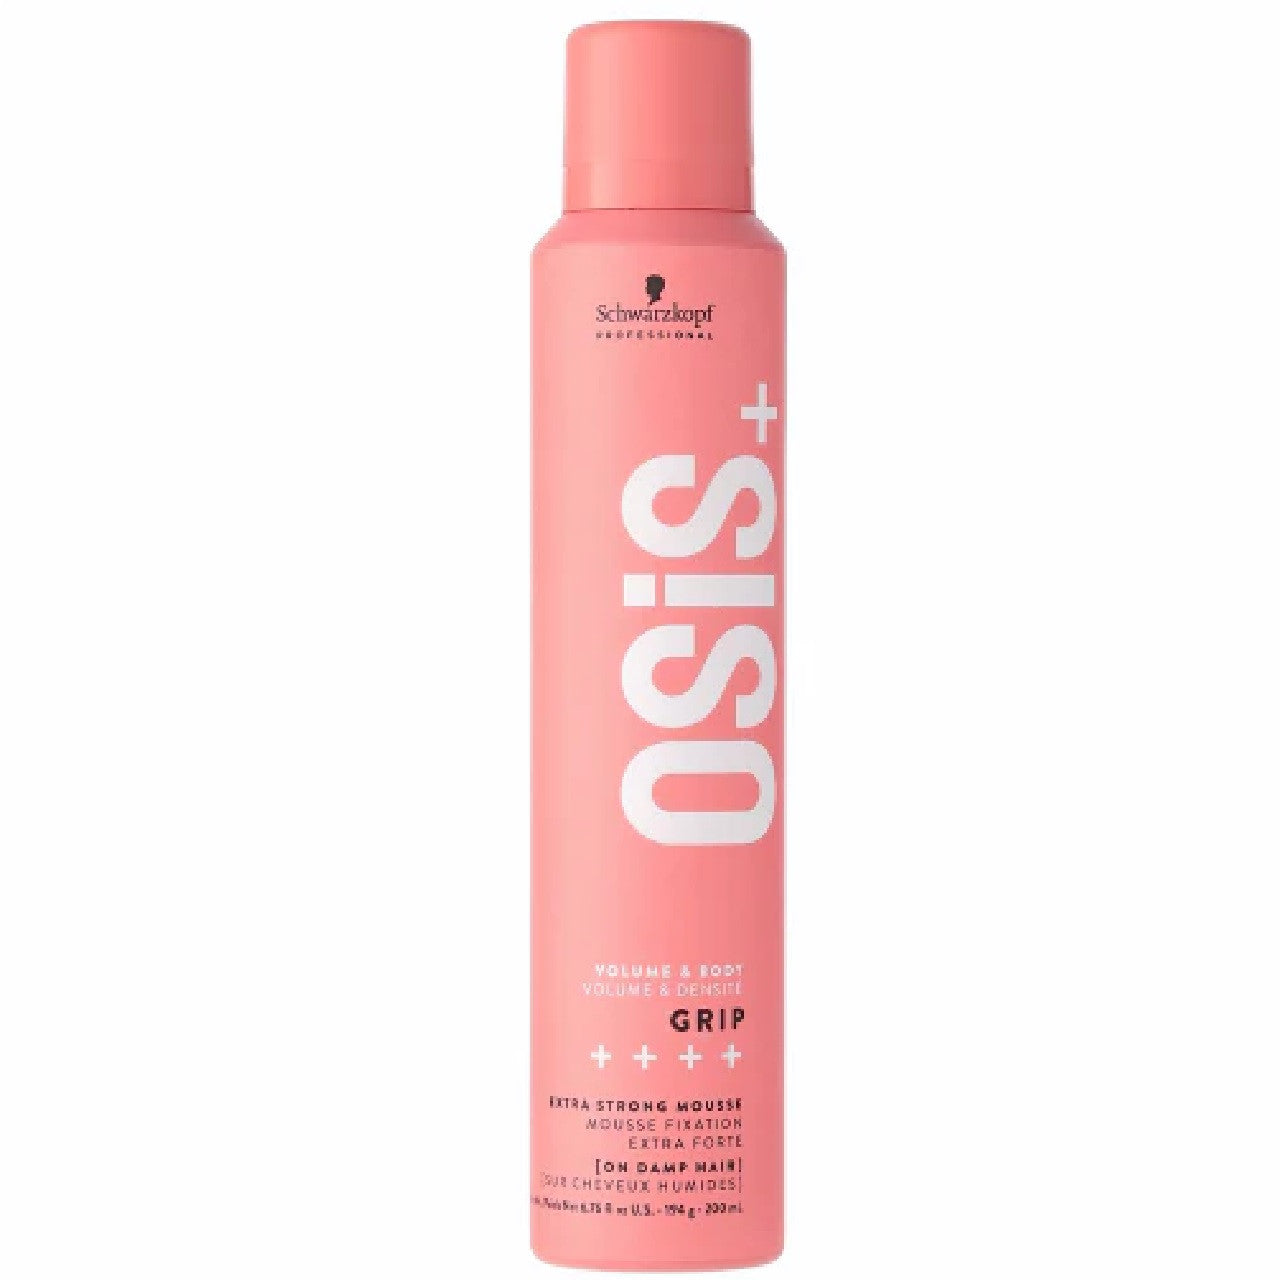 Schwarzkopf Professional OSiS+ Grip - Extreme Hold Mousse For Massive Volume 200ml